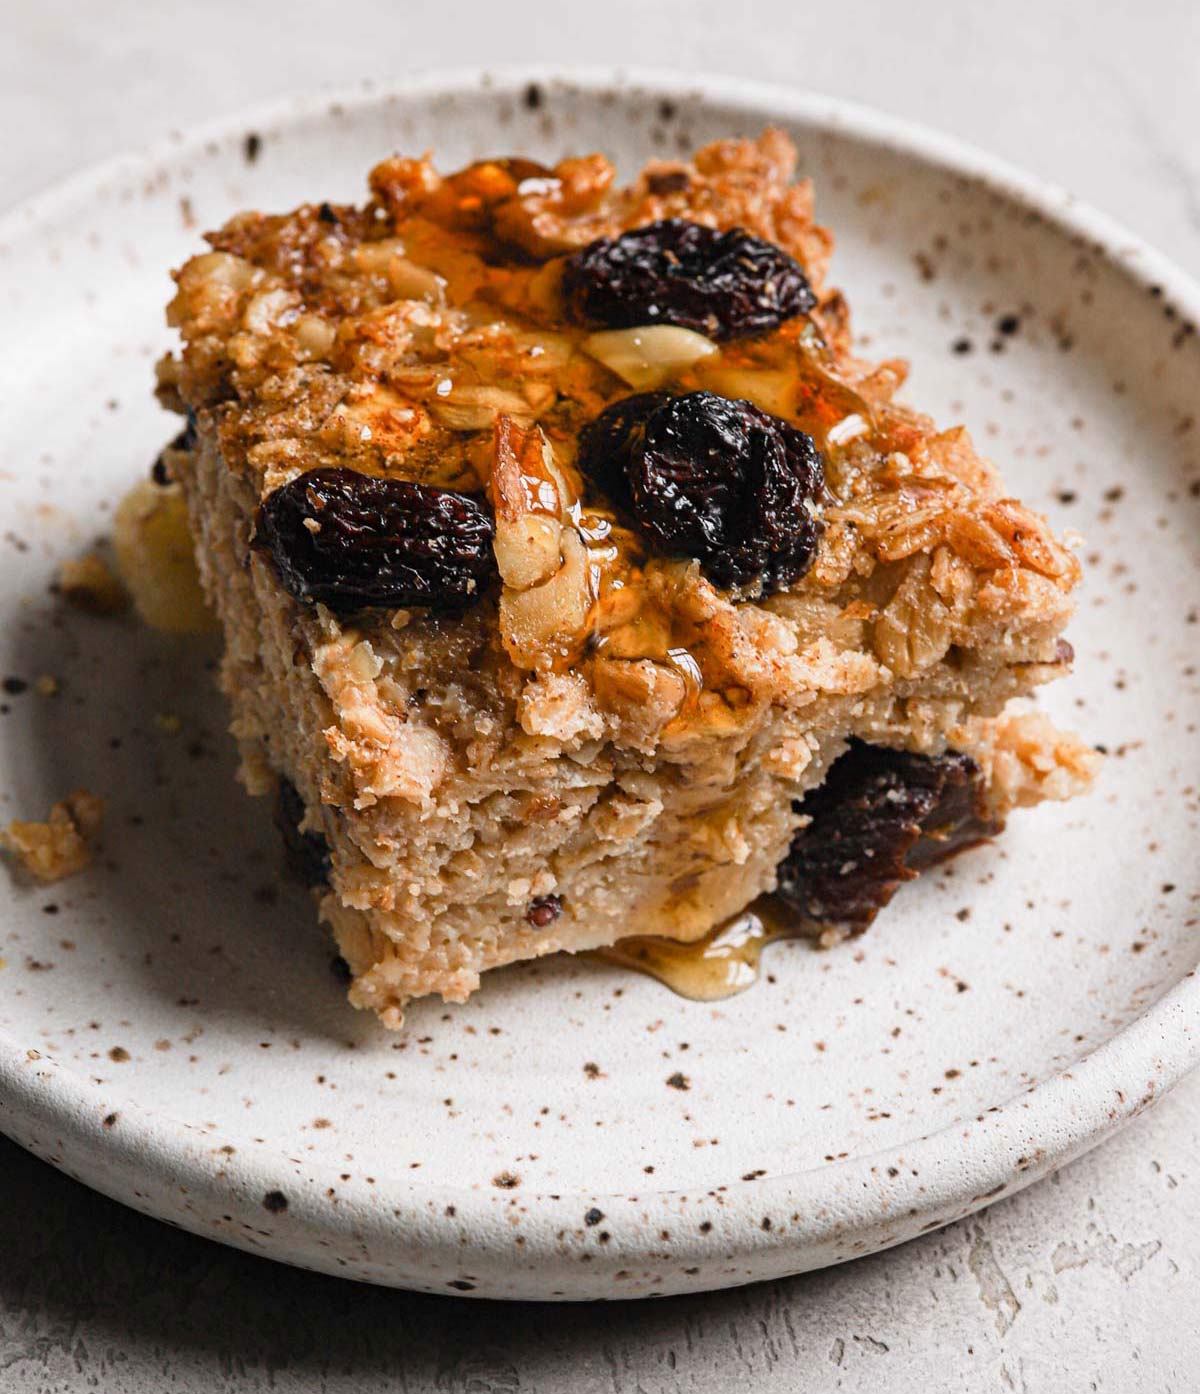 Square of baked oatmeal with apples, raisins, and walnuts on a plate.